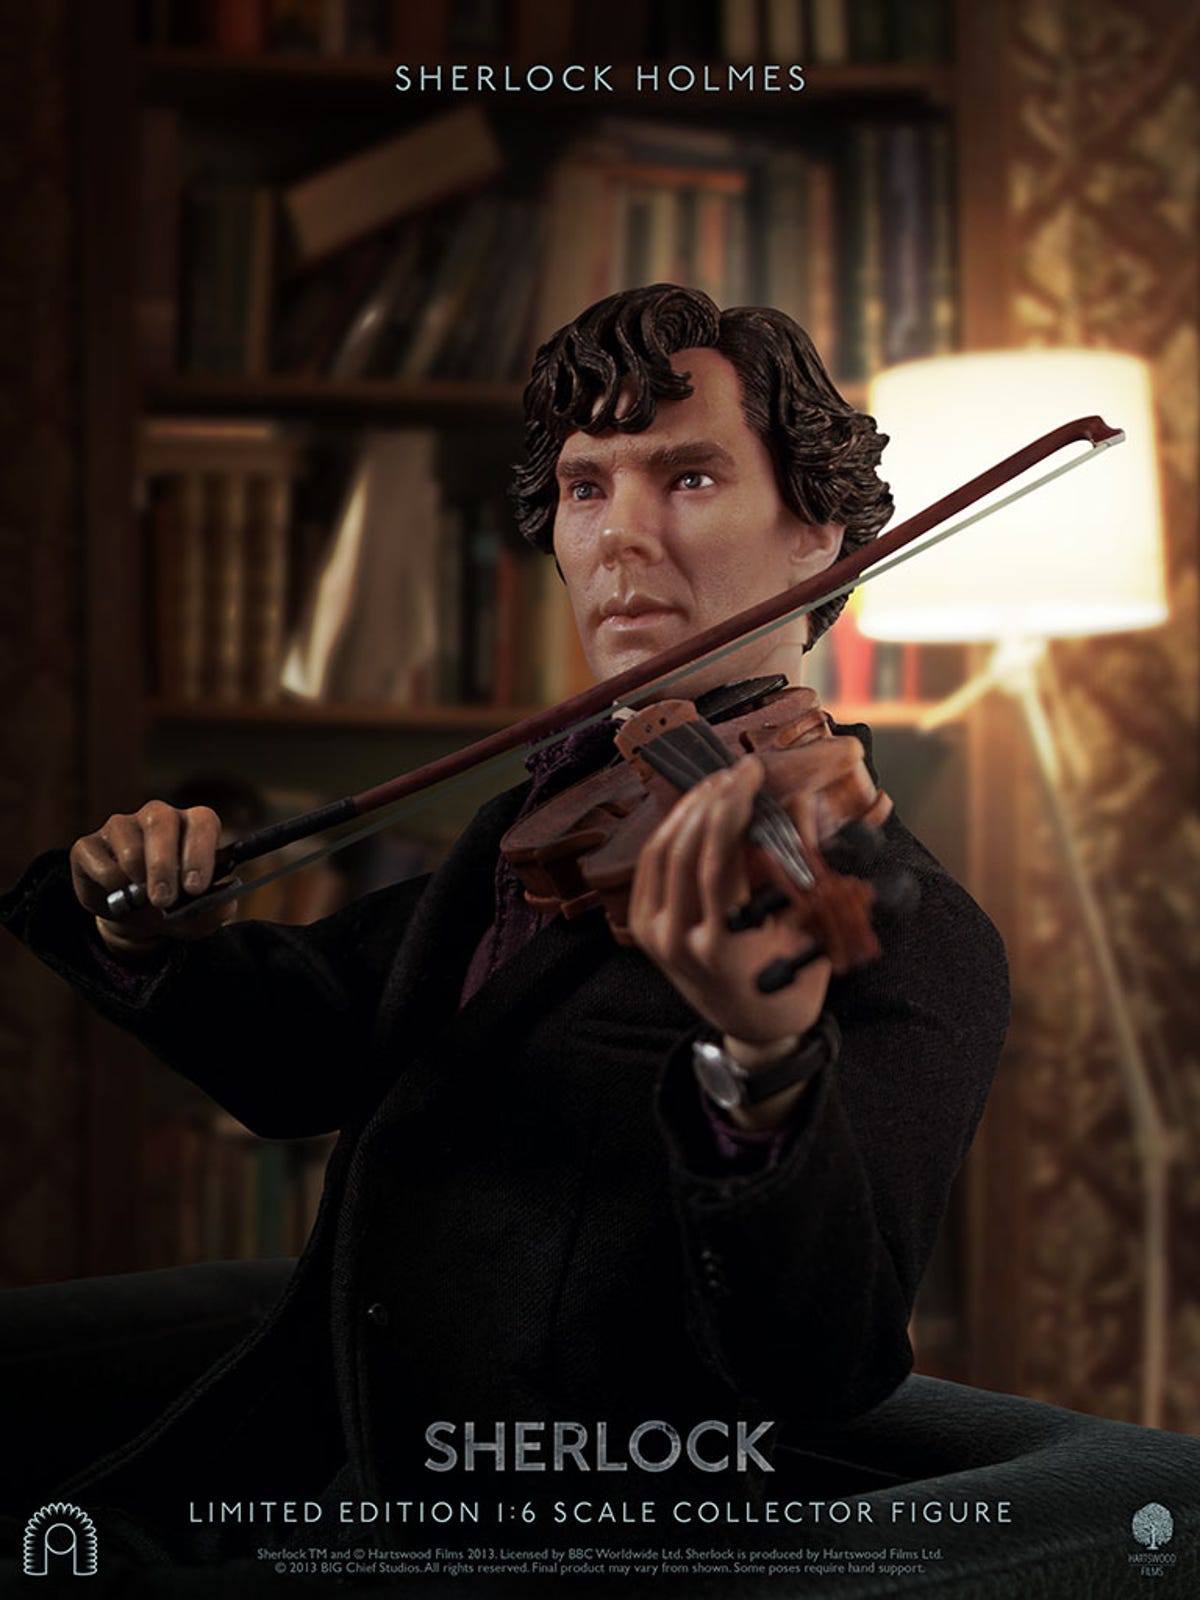 Sherlock' collector dolls look for tiny clues - CNET